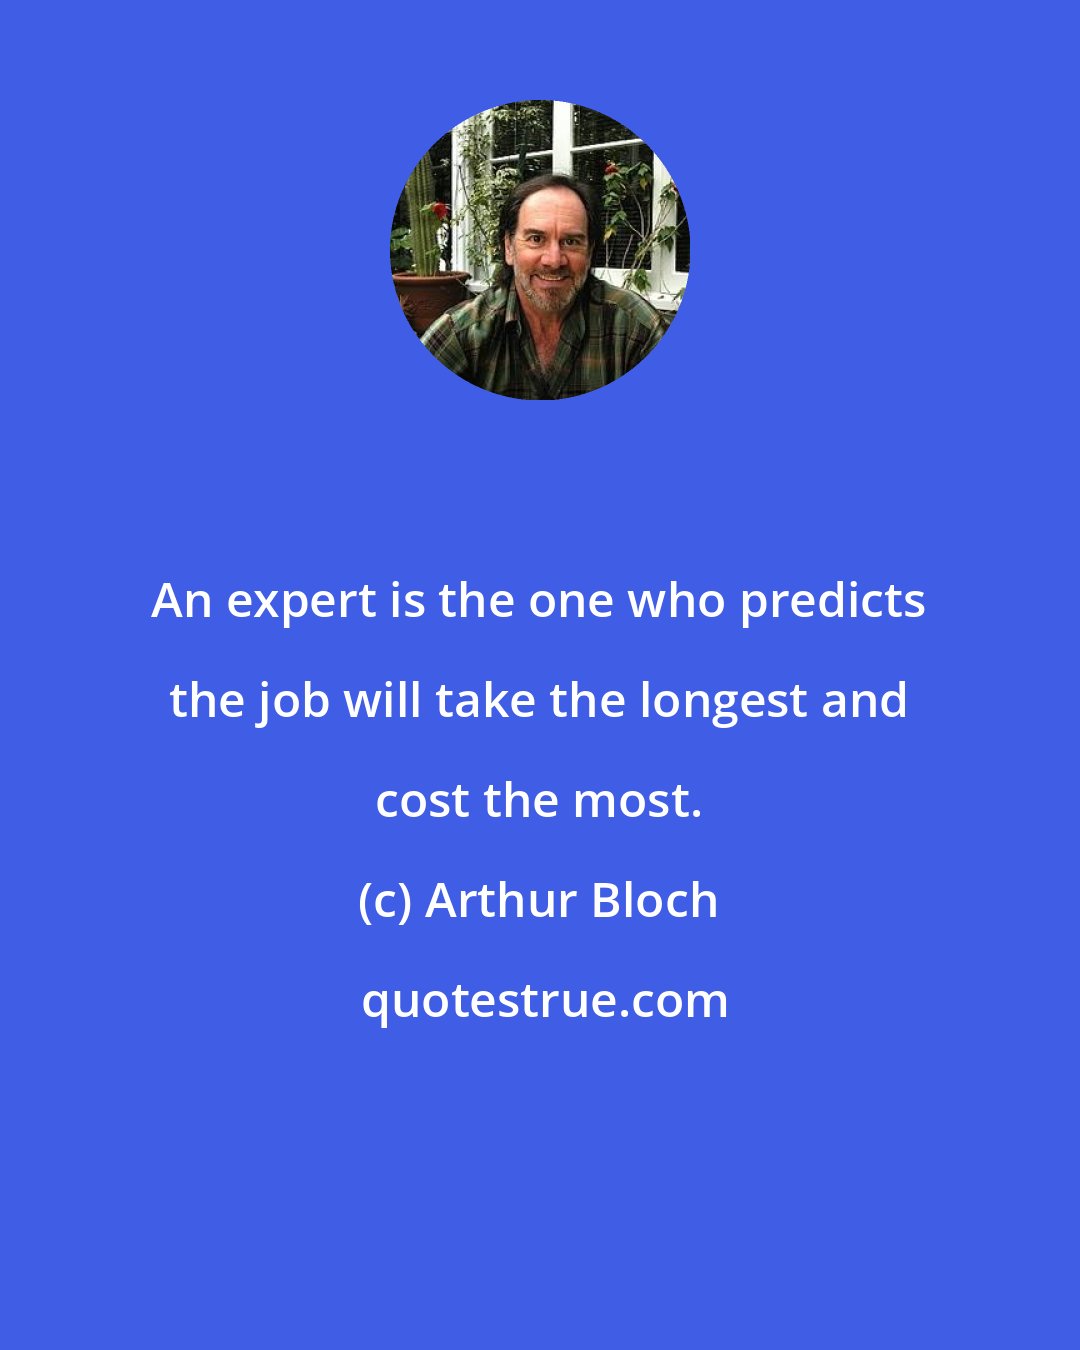 Arthur Bloch: An expert is the one who predicts the job will take the longest and cost the most.